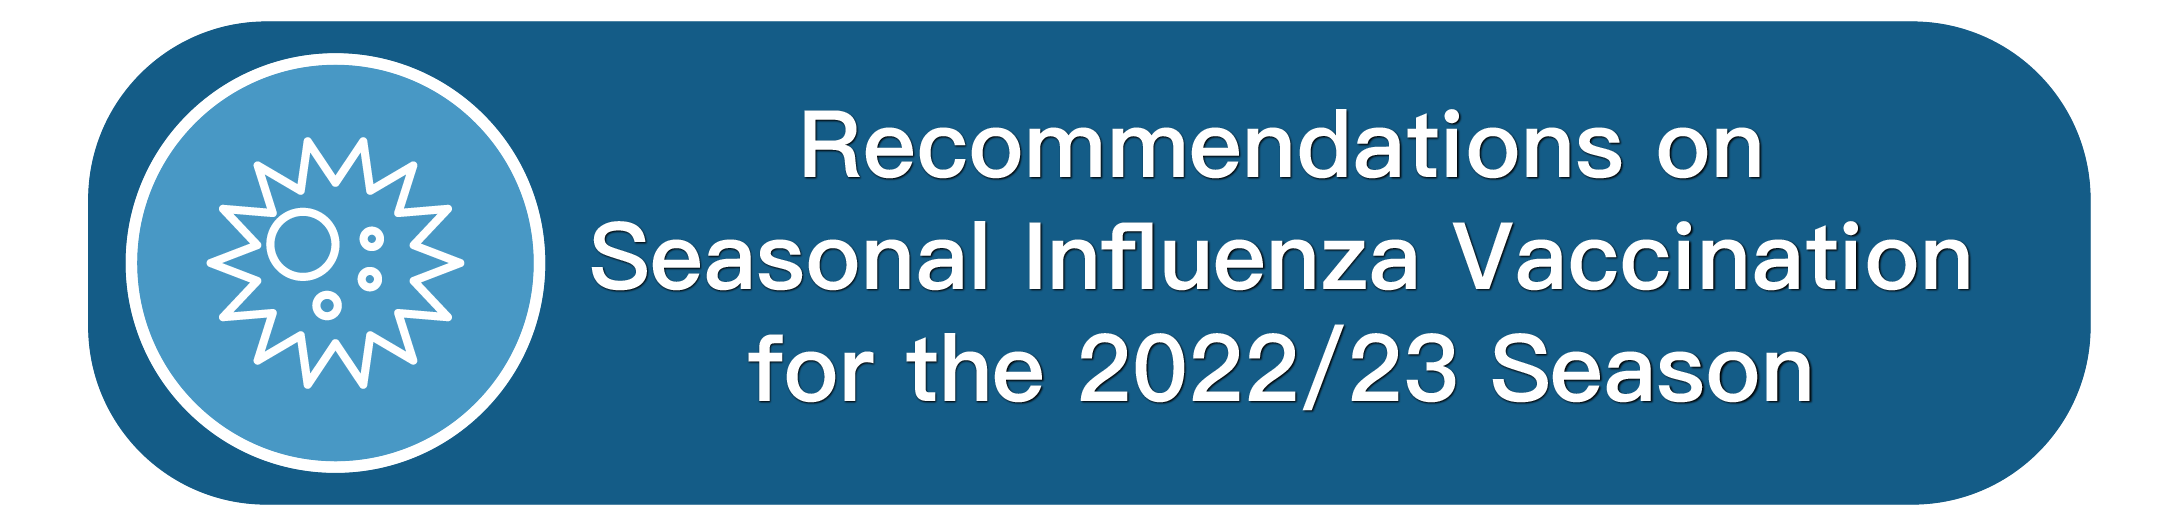 Recommendations on Seasonal Influenza Vaccination for the 2021/22 Season